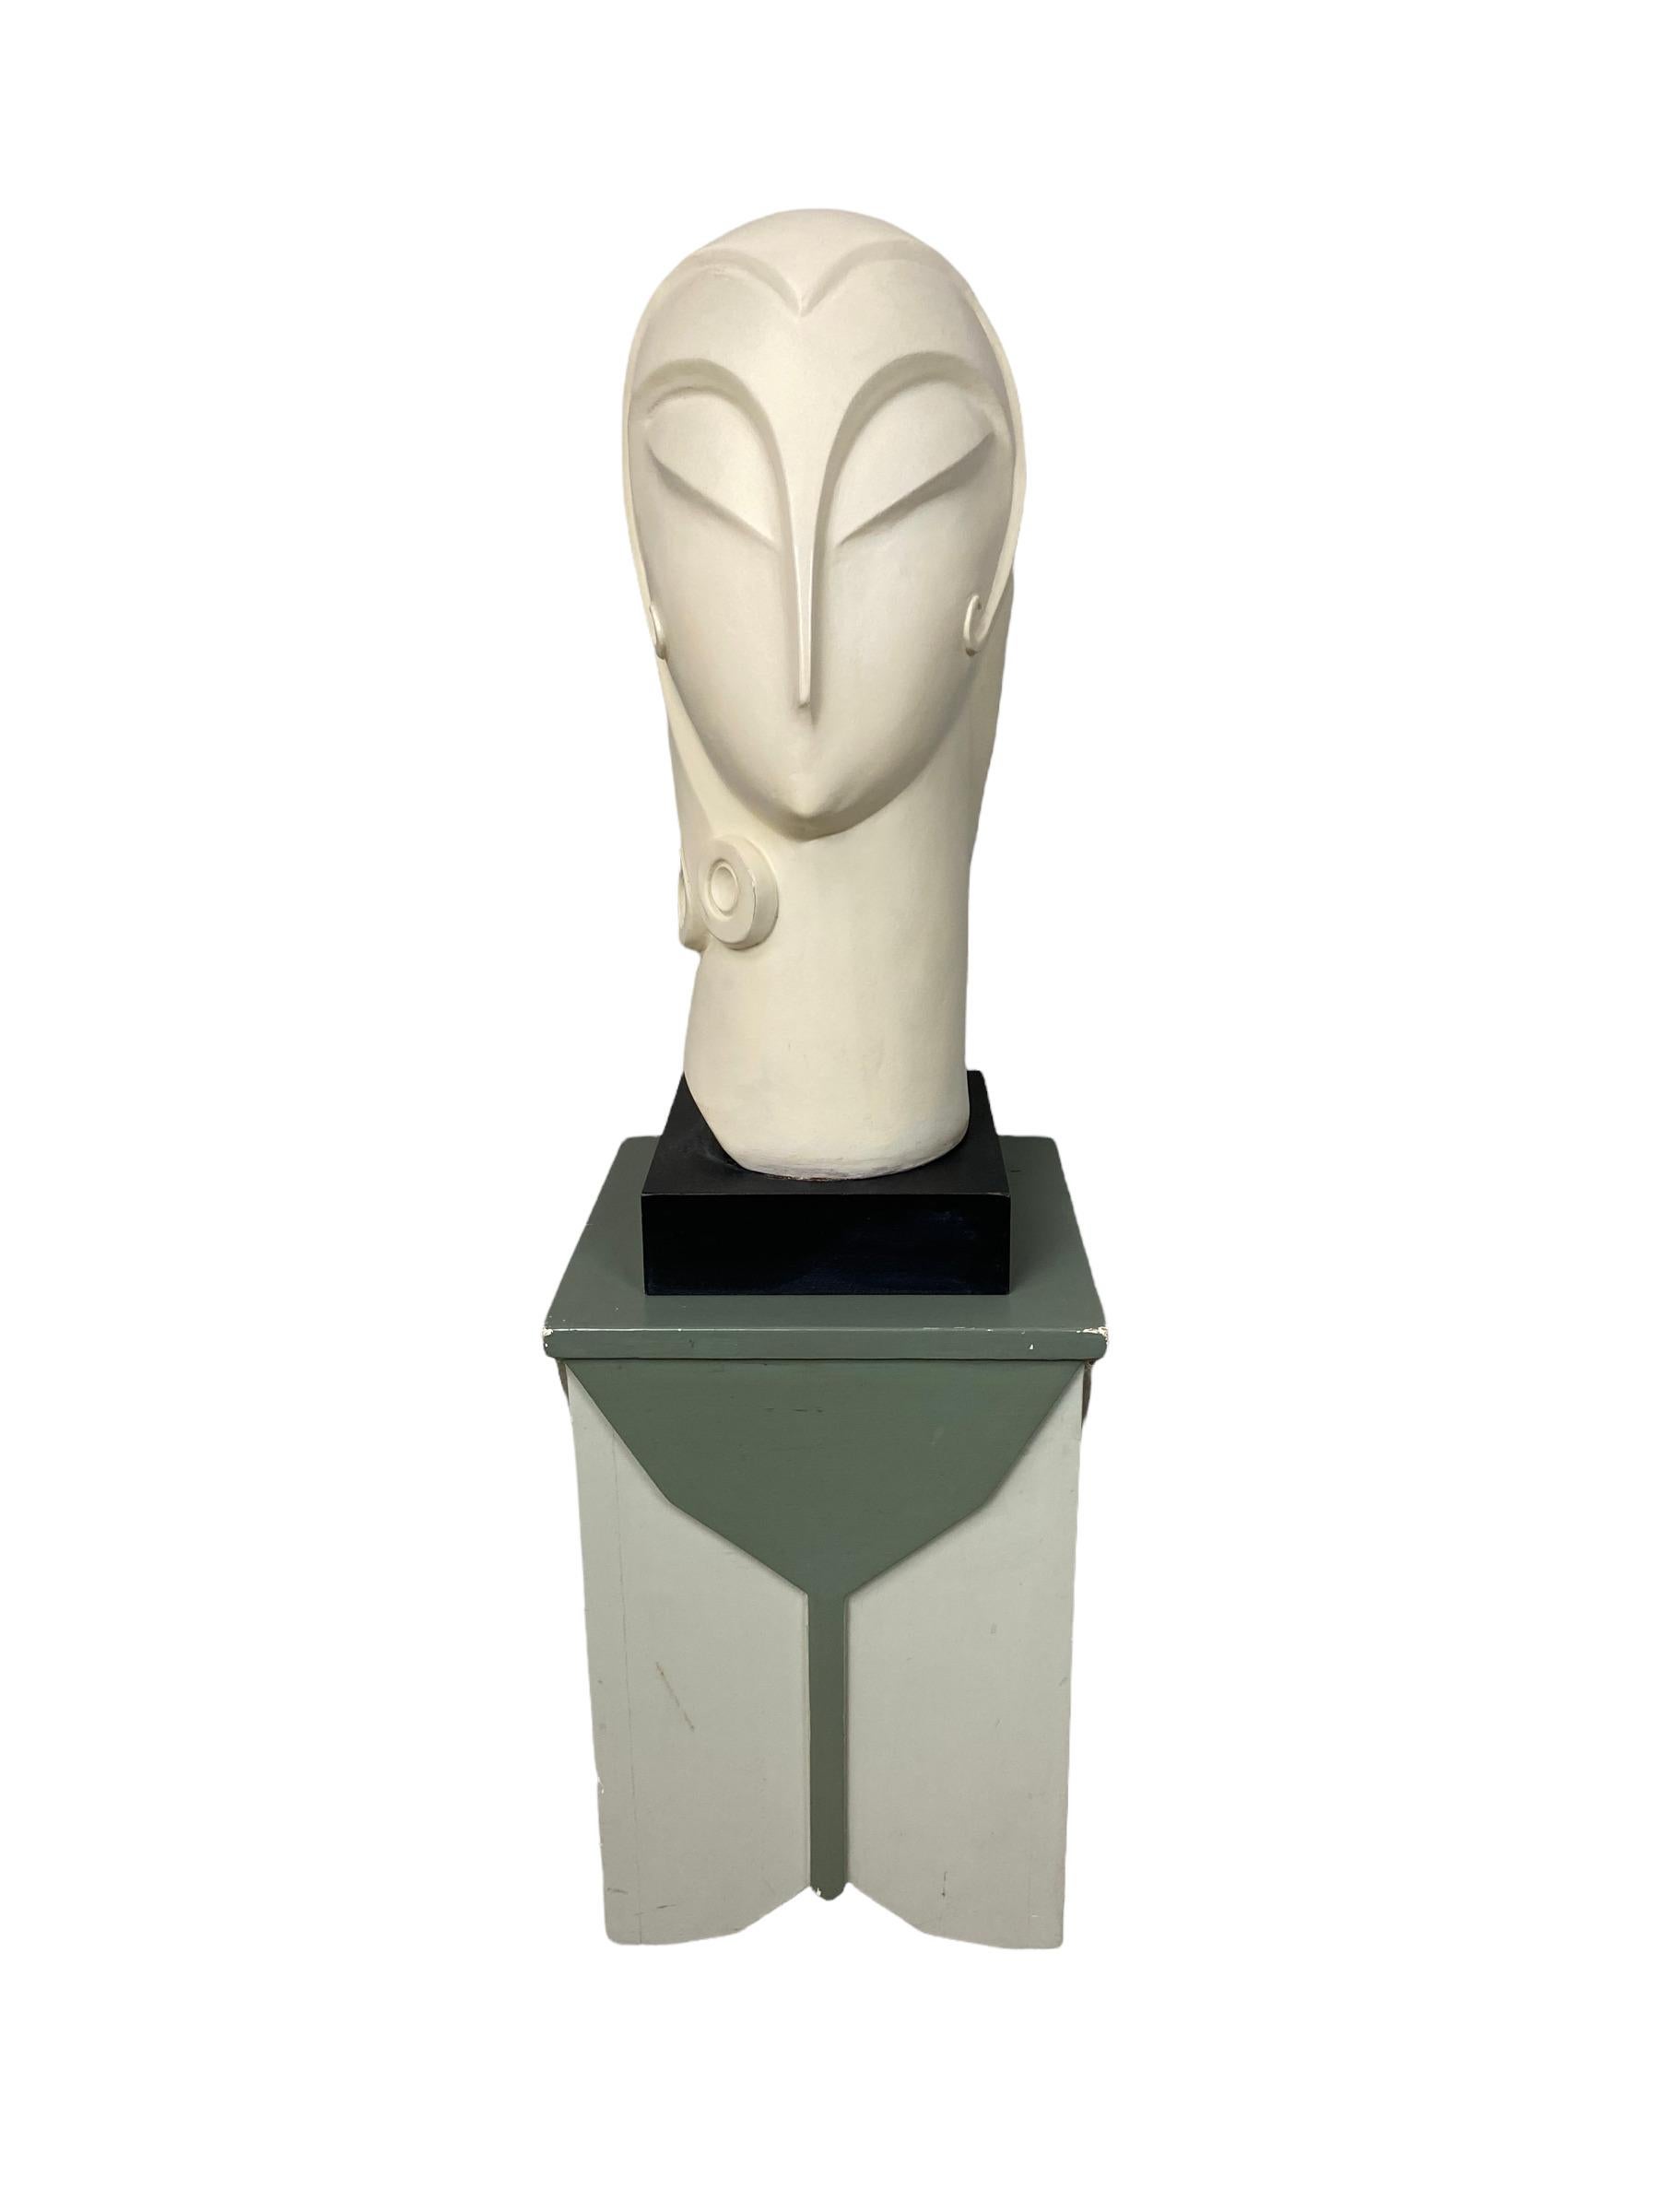 American Ceramic Statue by David Fisher For Sale